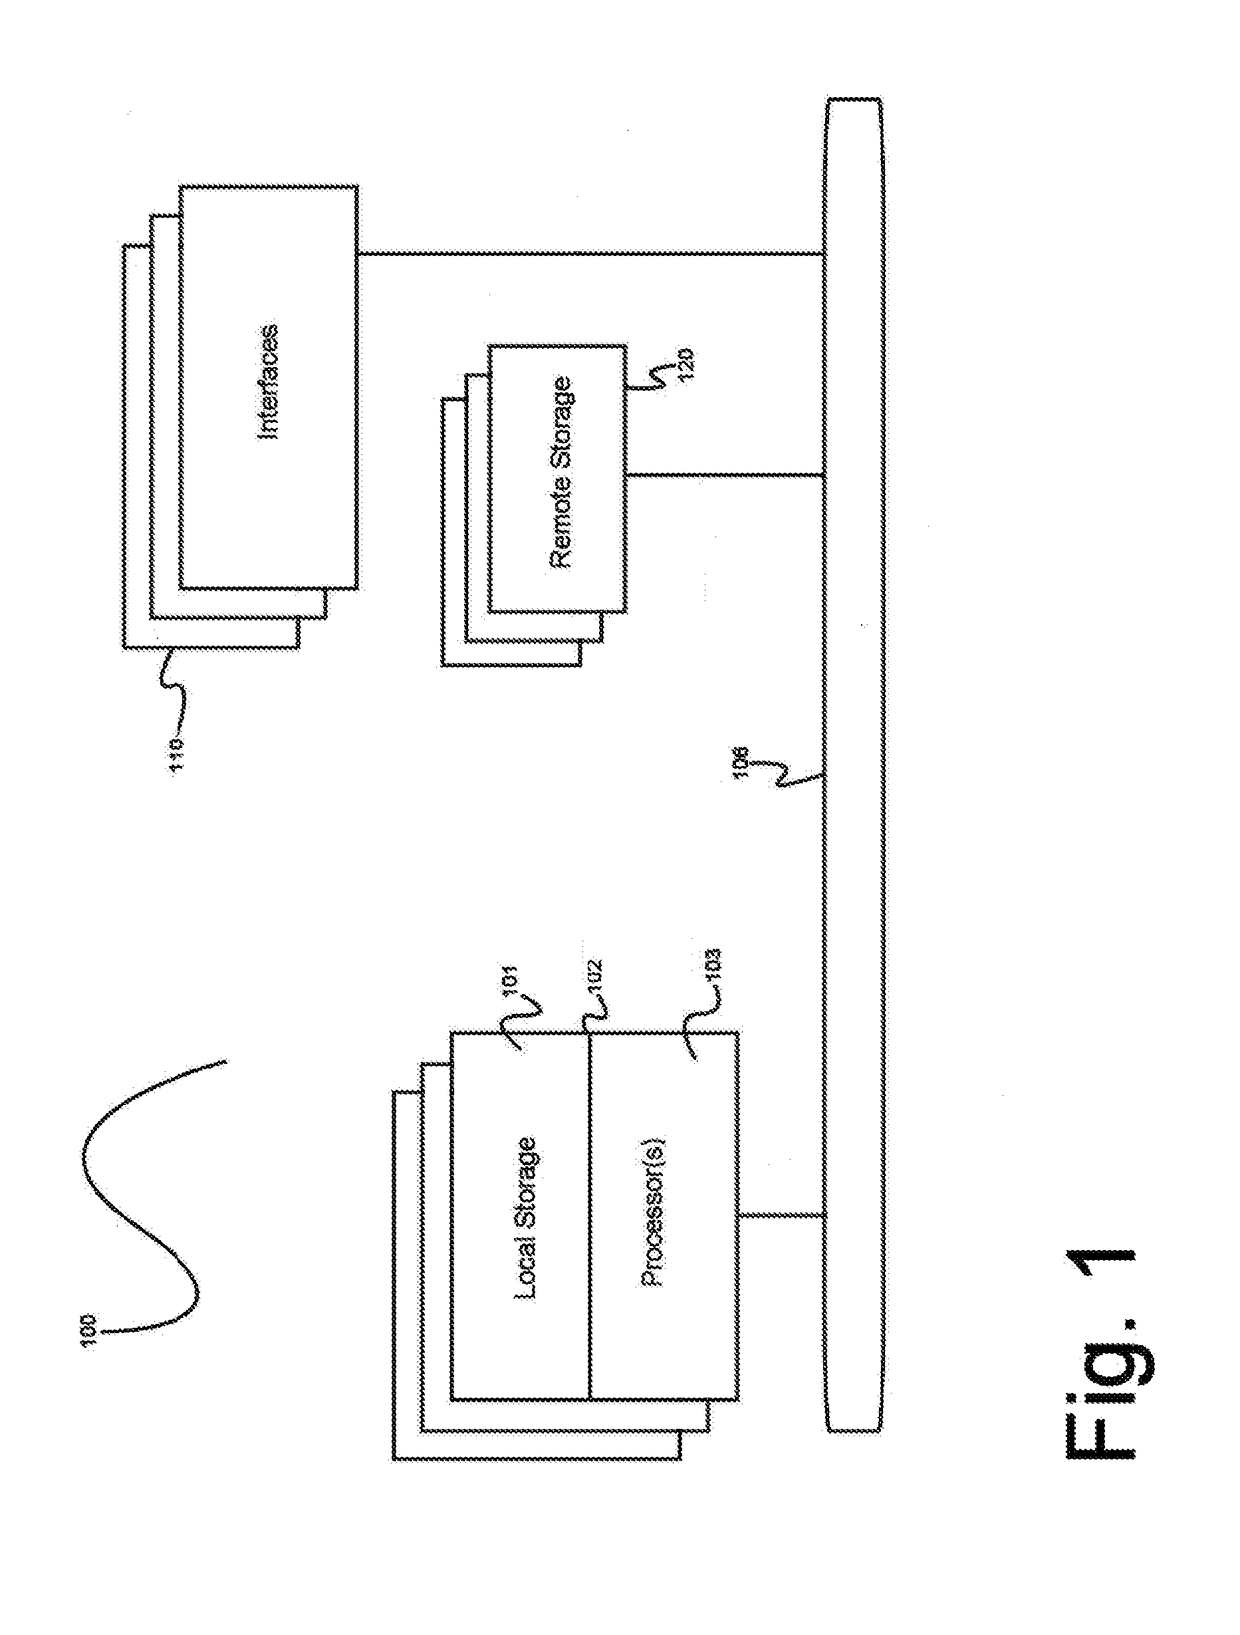 System and method for an optimized, self-learning and self-organizing contact center